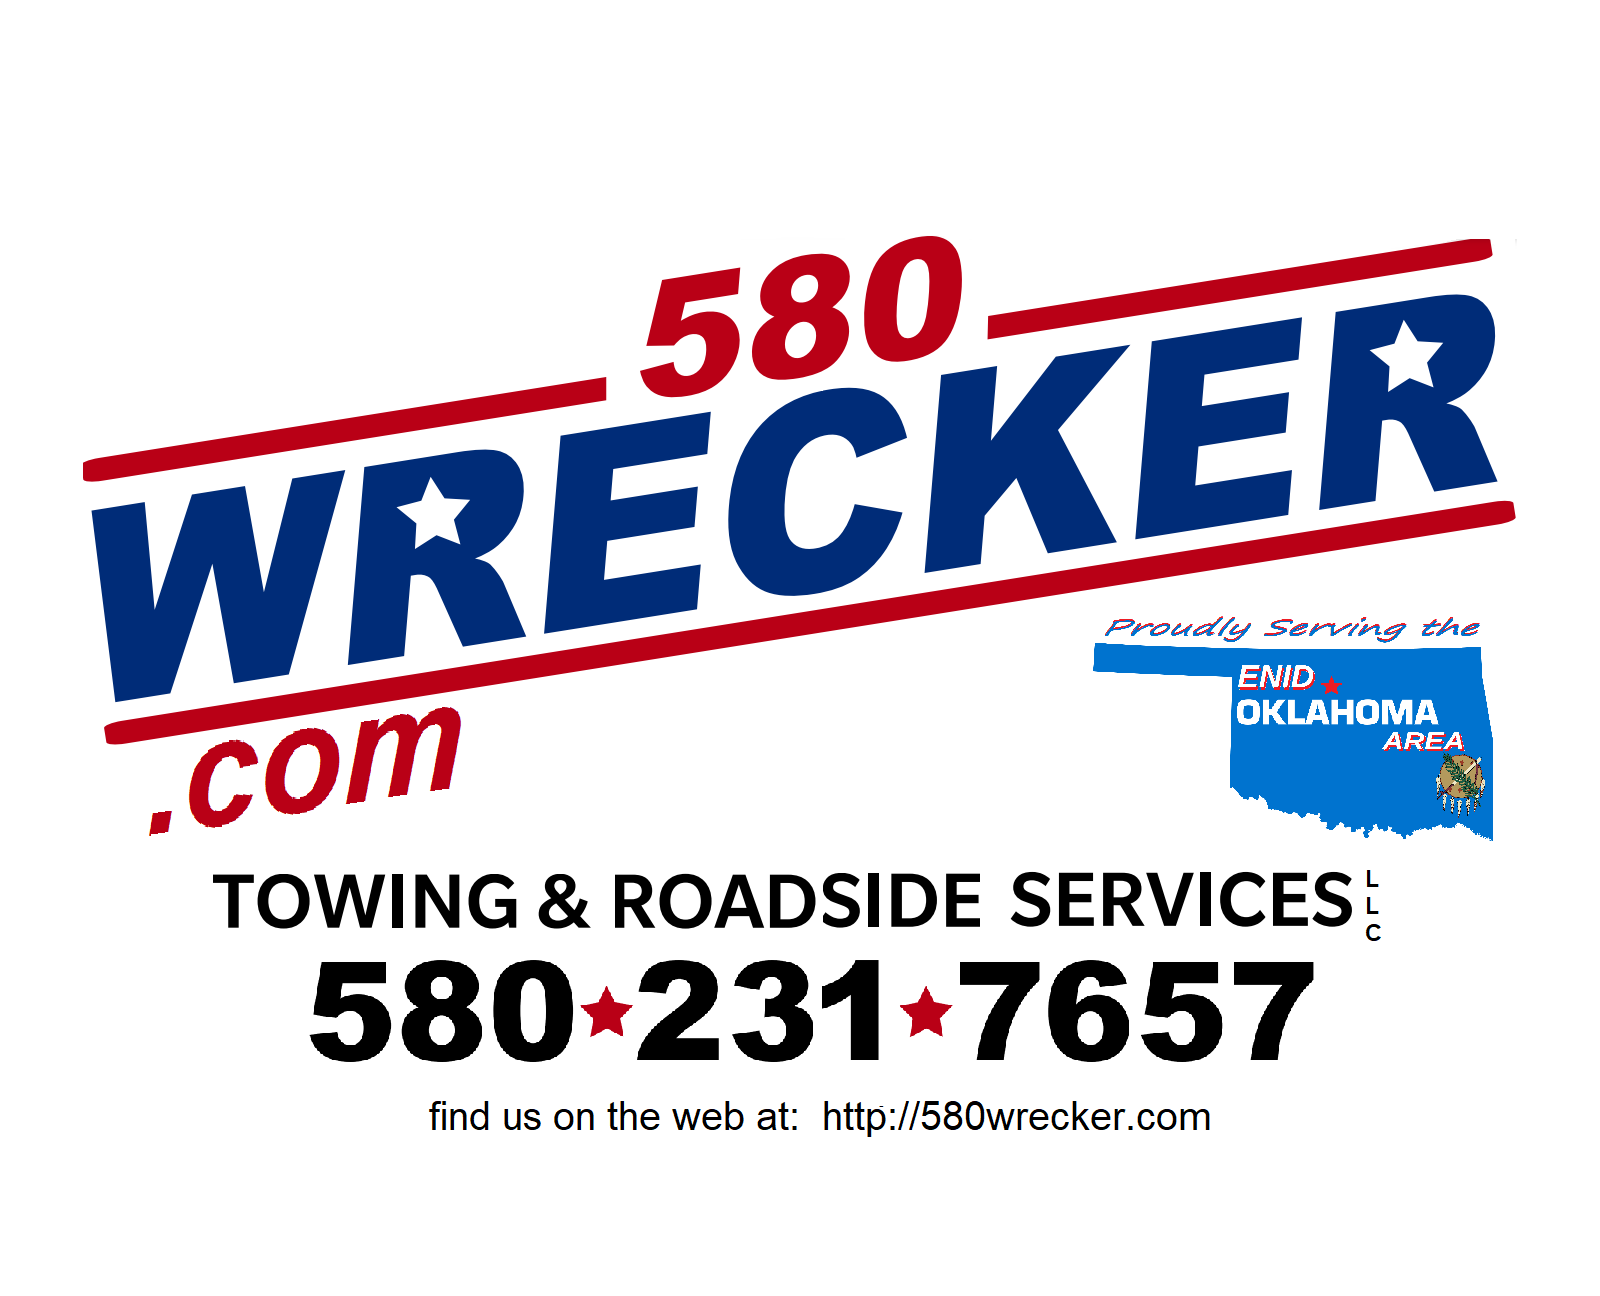 Affordable Towing Near Me, Tow Truck,, near me, towing near me, cheap tow near me, $50 tow near me, enid ok, garfield co, ok, garfield county towing service, top rated, fast response, frankl, -y, -in, the fastest tow service enid ok, nash, jet, waukomis, hennessey, drummond, lahoma, meno, ames, ringwood, cherokee, garber, kremlin, hillsdale, goltry, carrier, covington, douglas, fairmont, marshall, pioneer school, enid high school